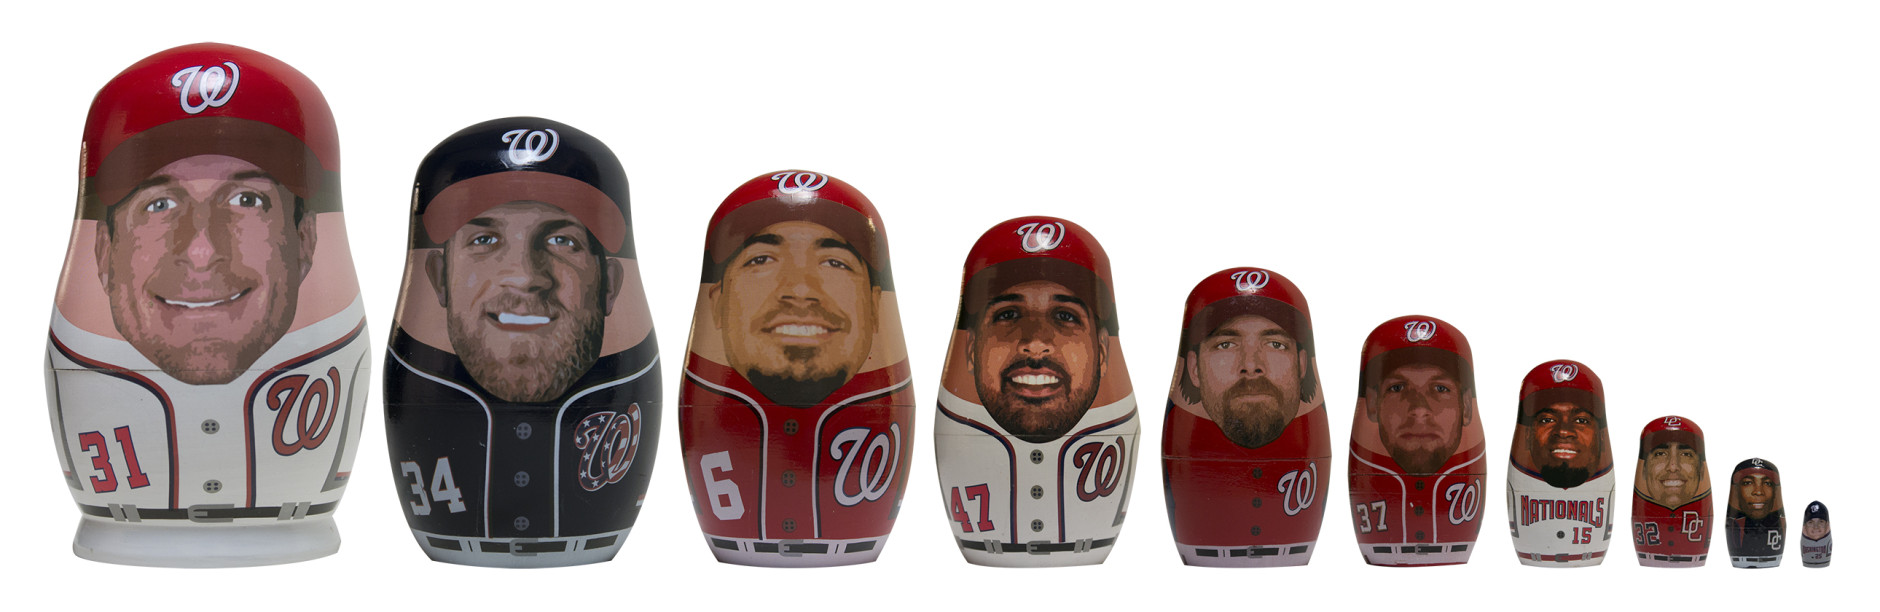 And here's the 10-piece nesting doll set. Gates open at 4:30 p.m. on Thursday. The first pitch is 7:05 p.m. (Courtesy Washington Nationals)